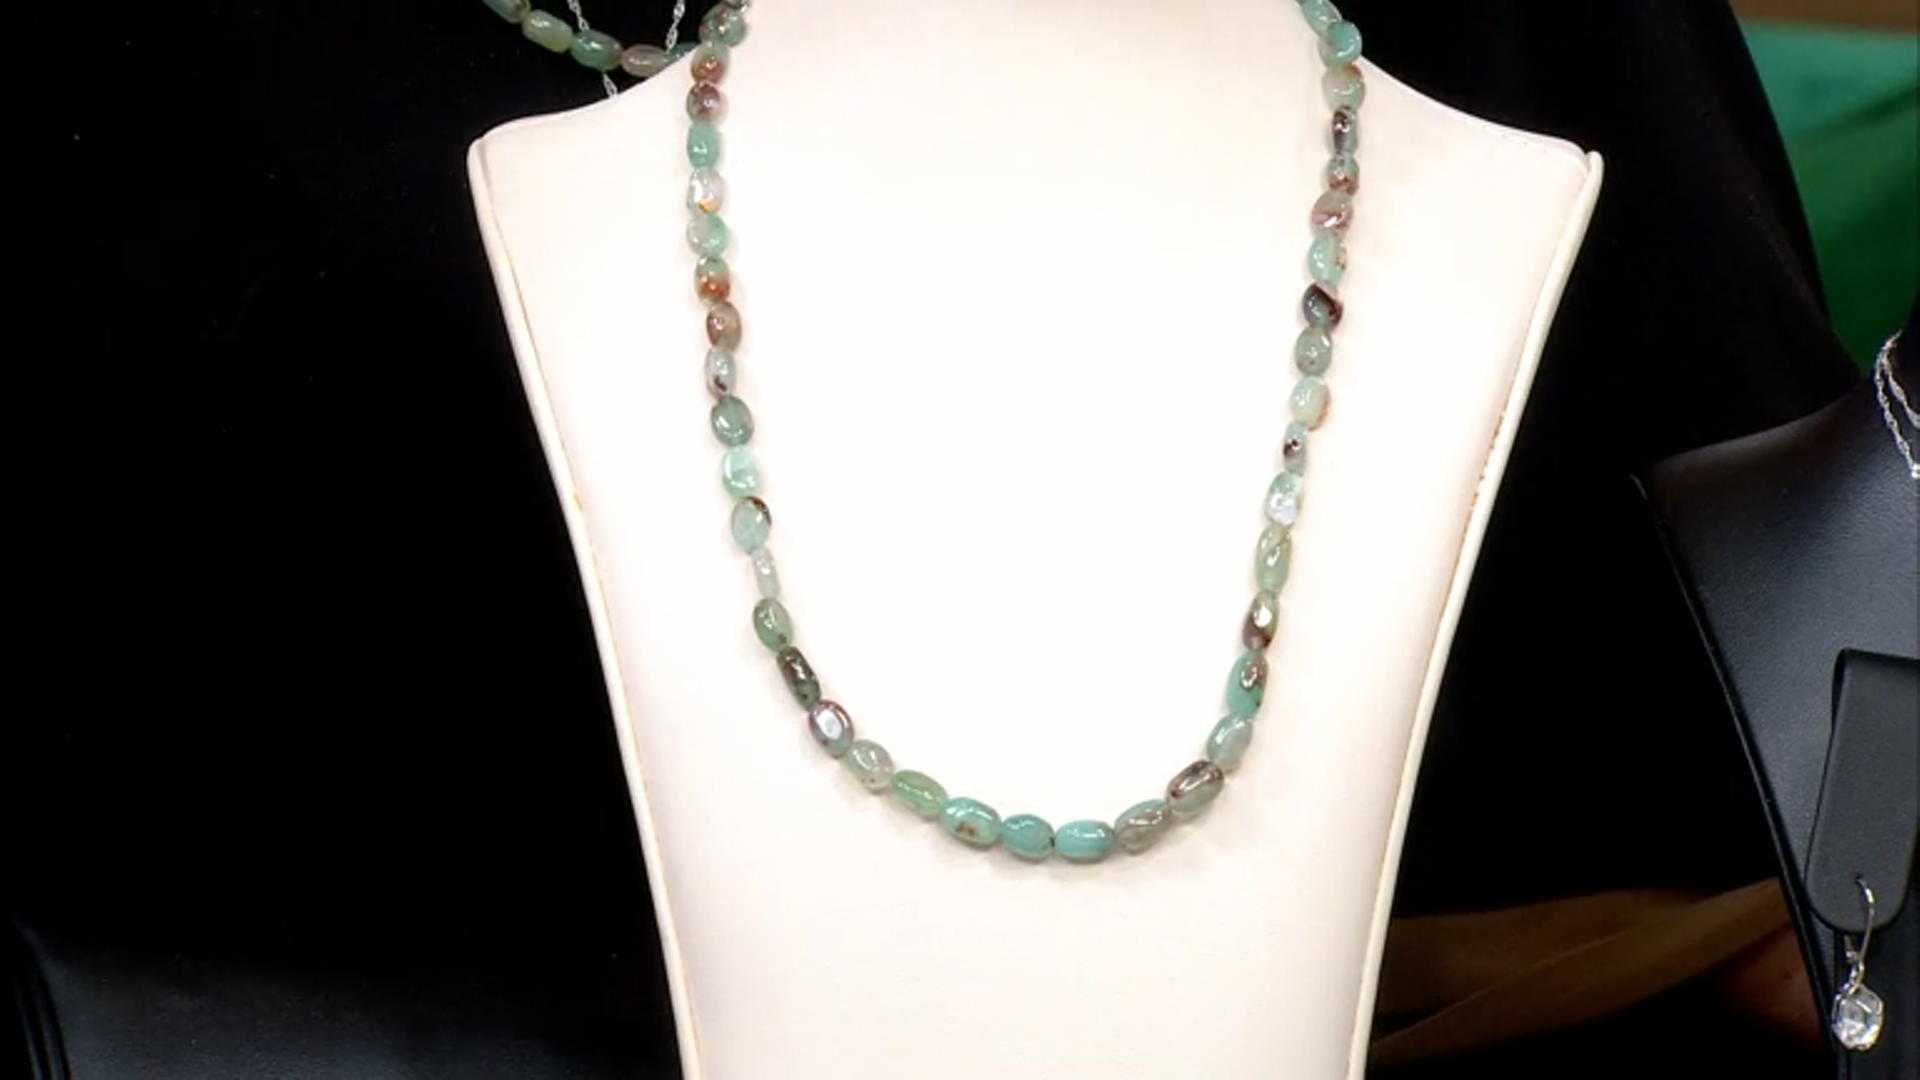 Aquaprase® Rhodium Over Silver Bead Strand Necklace Video Thumbnail